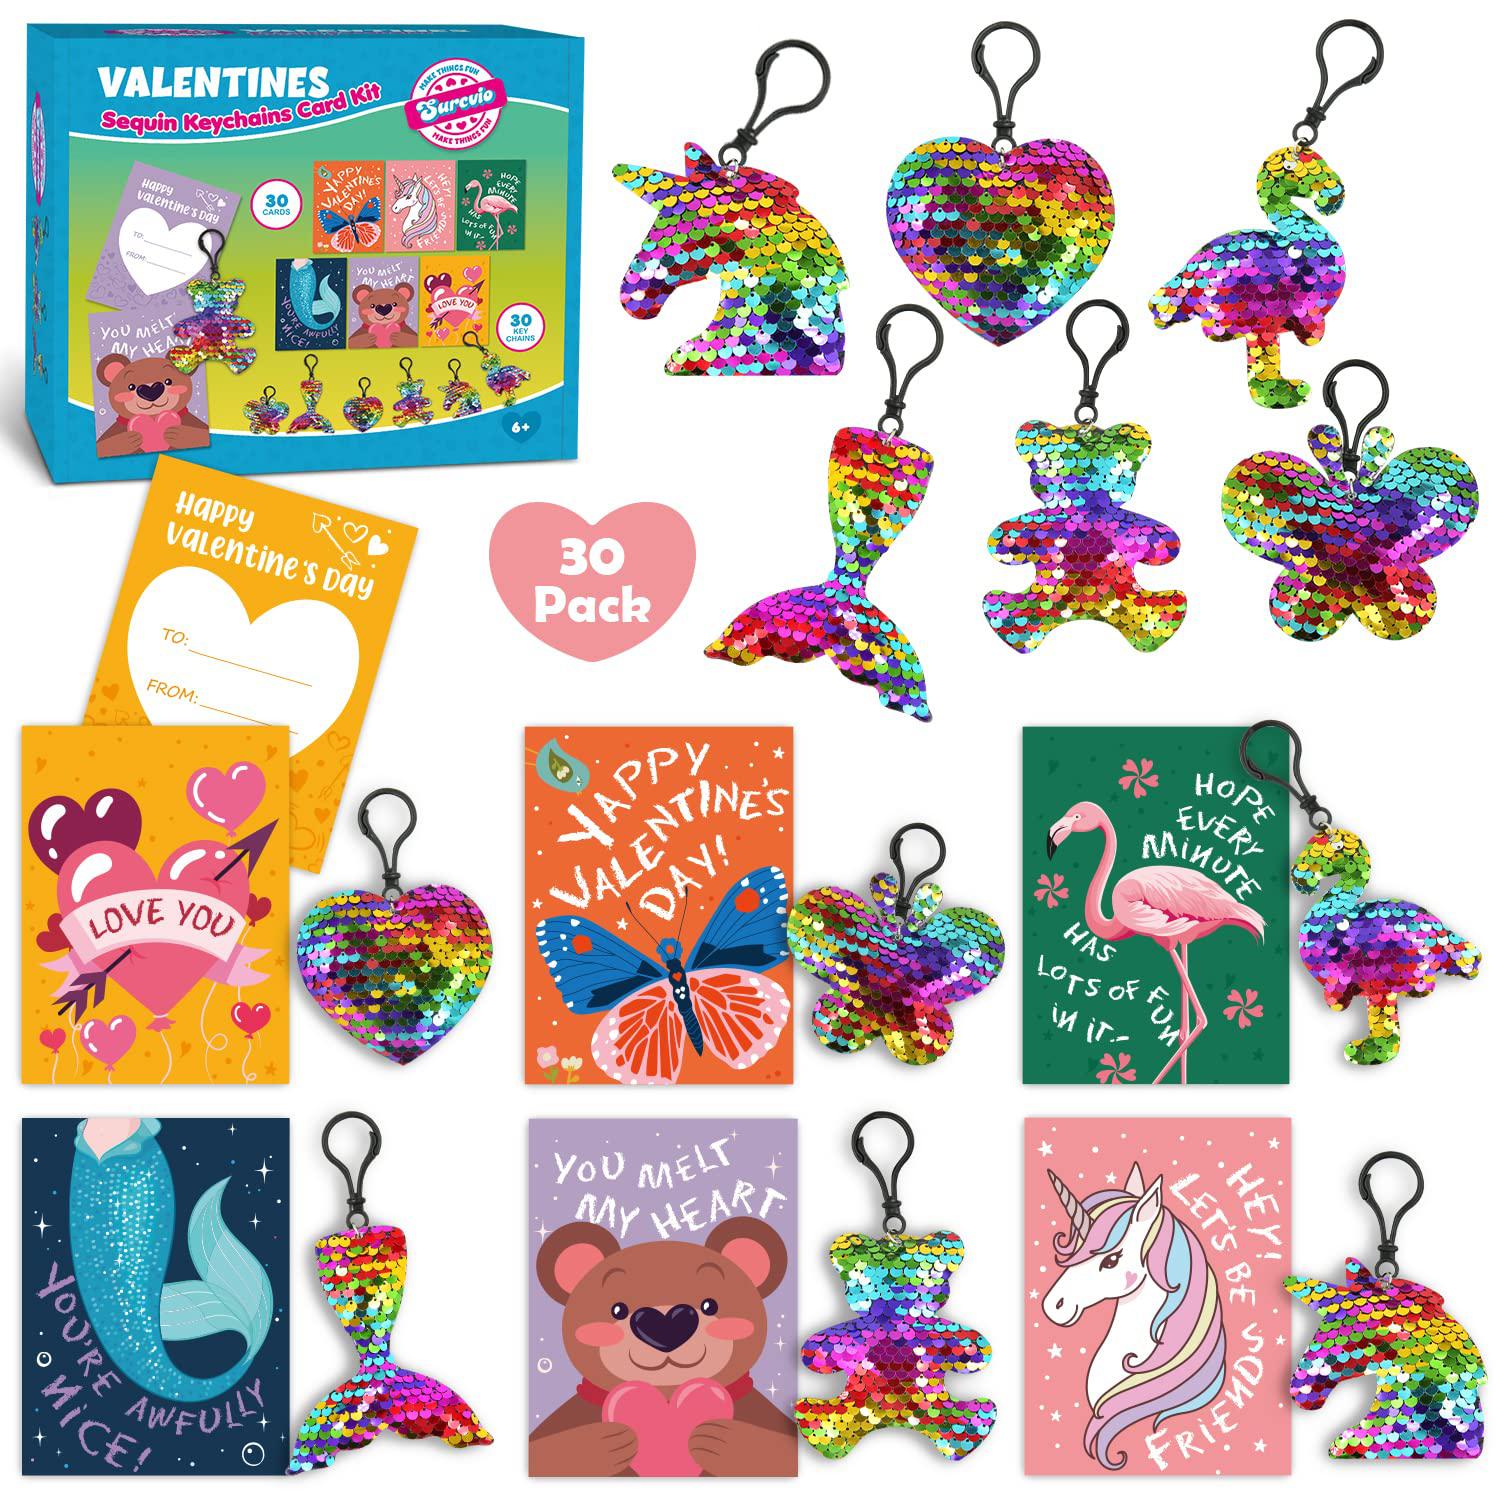 SURCVIO 30 Pack Valentines Day Gifts for Kids, Glitter Sequin Keychains with Valentines Greeting Cards for Kids, Valentine's